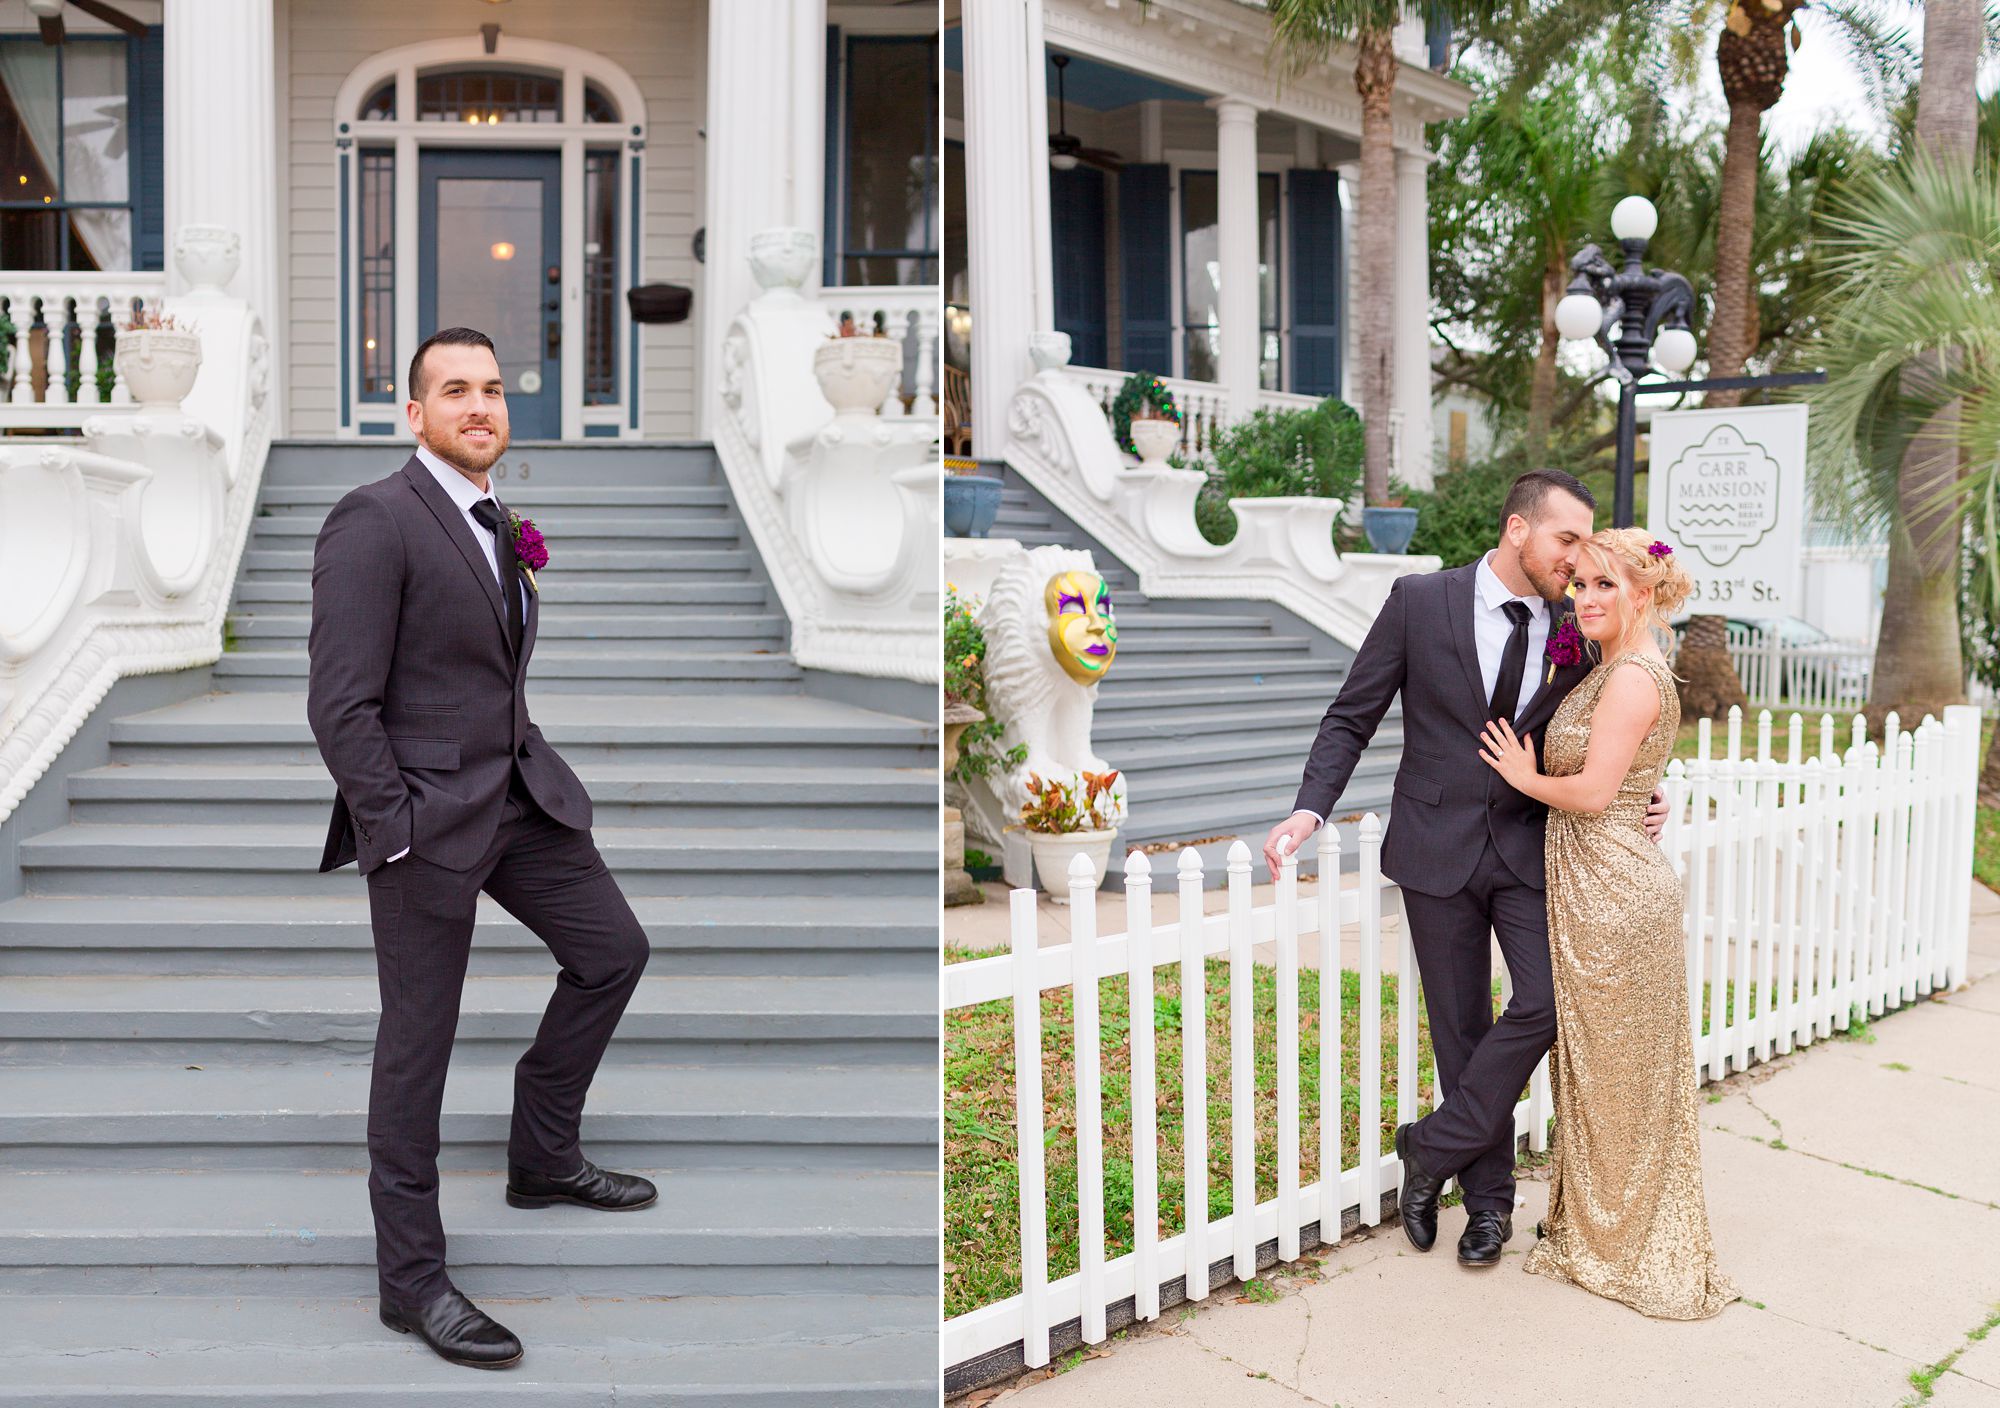 Portrait of a bride and groom in front of the Carr Mansion in Galveston, Texas.